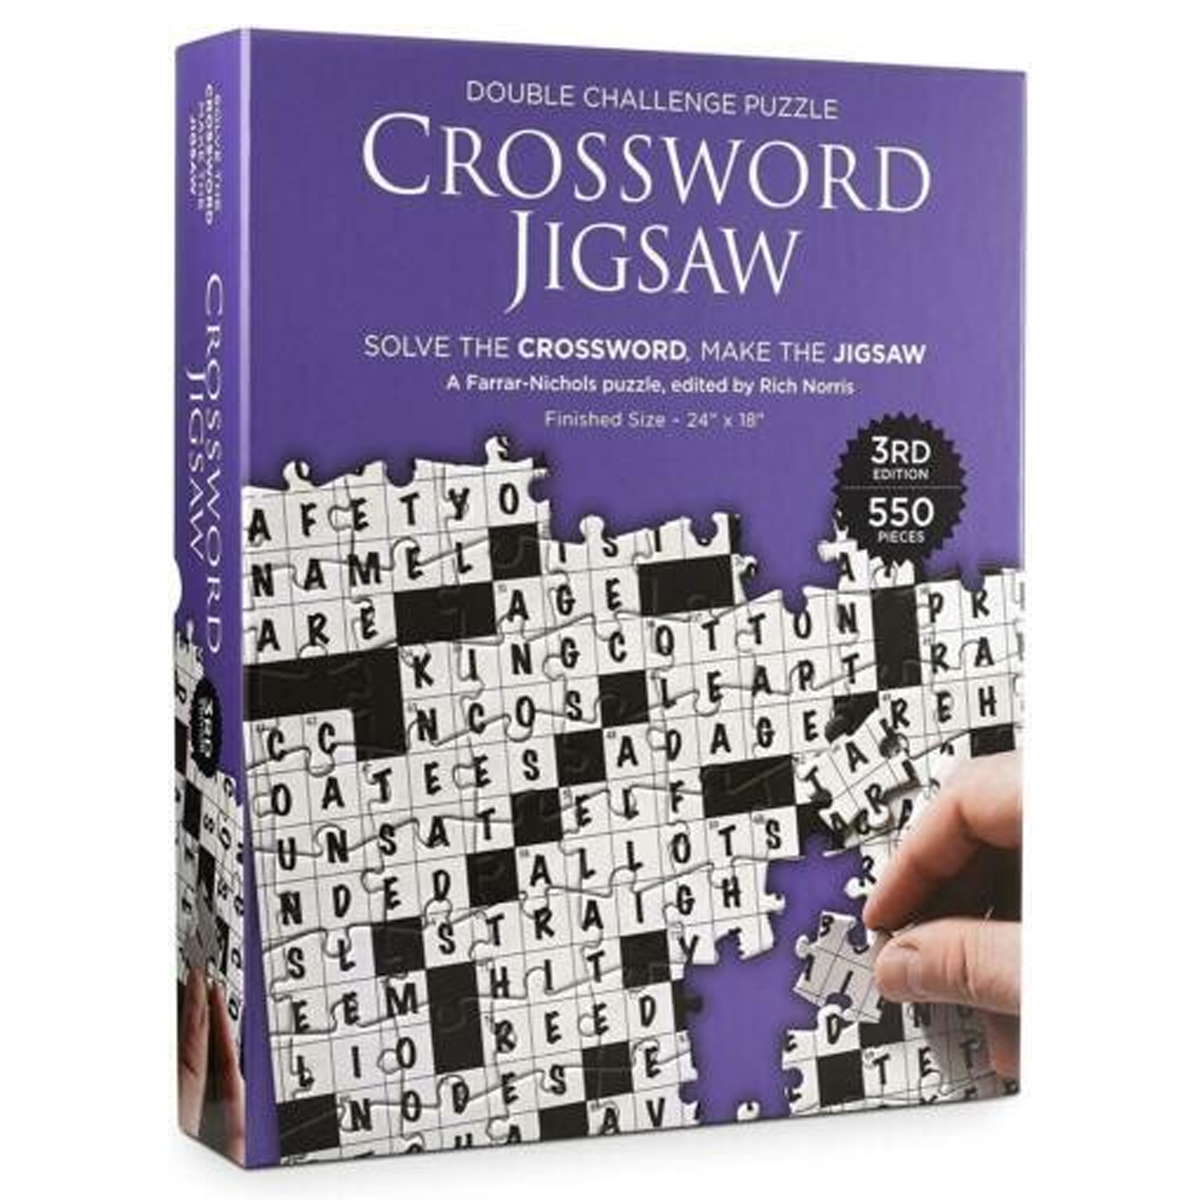 Babalu Crossword Jigsaw 3rd Edition 550 Piece Double Challenge Puzzle